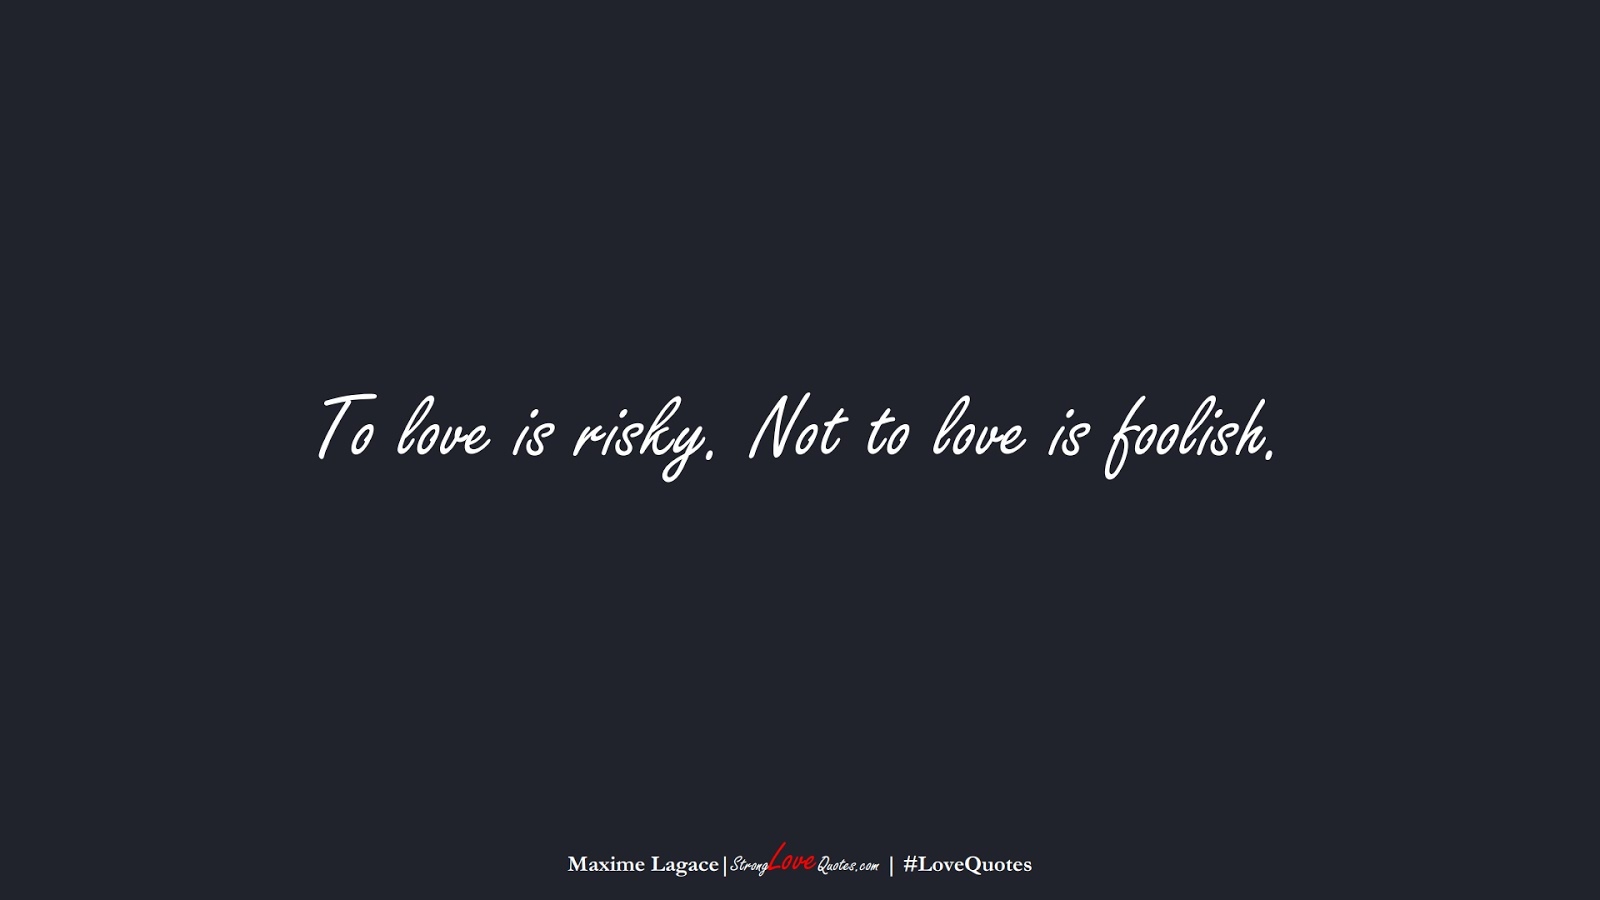 To love is risky. Not to love is foolish. (Maxime Lagace);  #LoveQuotes